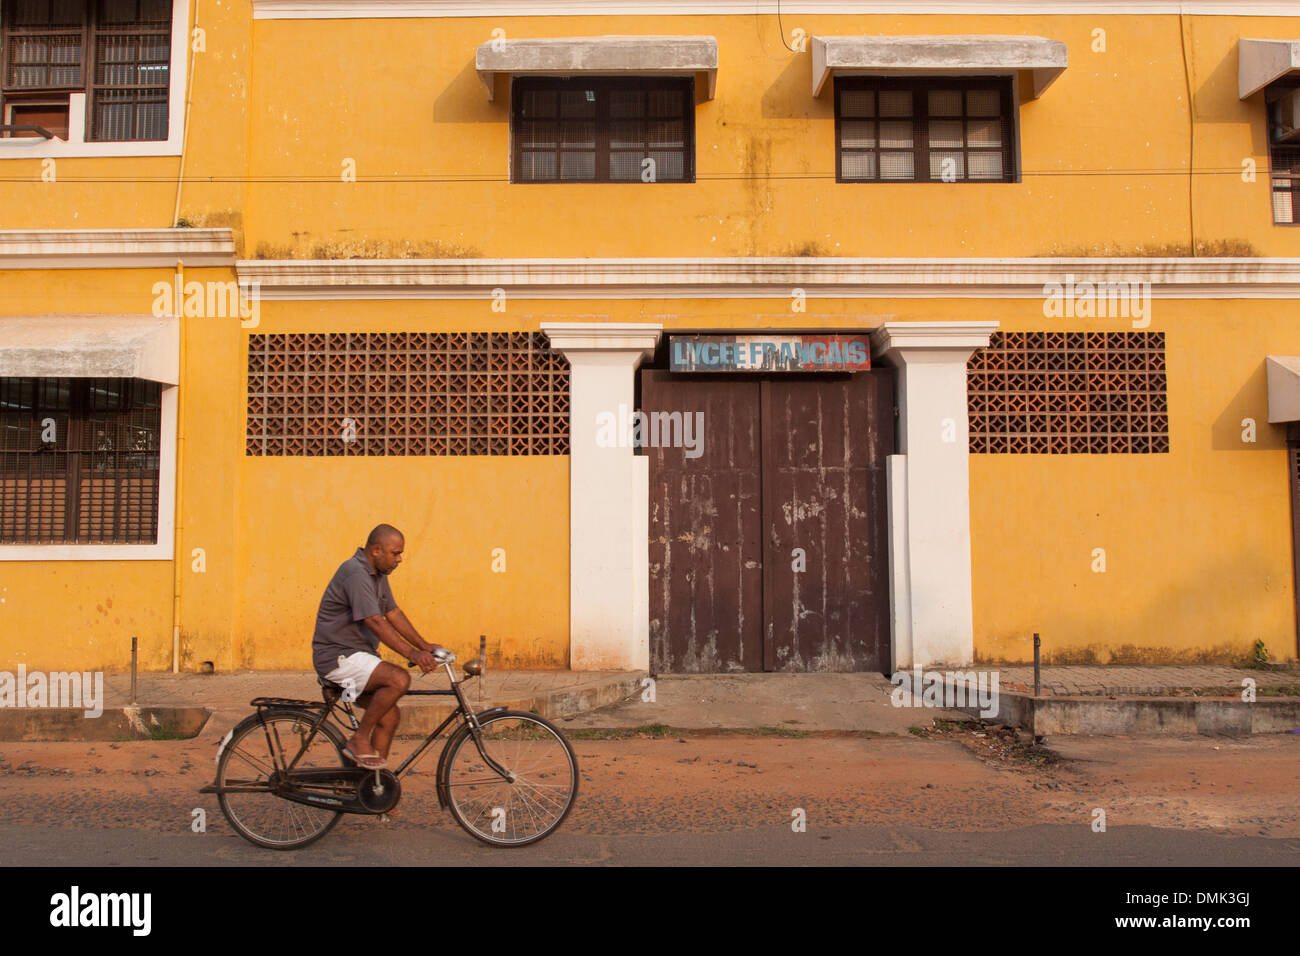 INDIAN ON A BICYCLE PASSING IN FRONT OF THE FACADE OF THE LYCEE FRANCAIS OF PONDICHERRY, FRENCH QUARTER, FORMER FRENCH TRADING POST OF PONDICHERRY, PUDUCHERRY, CAPITAL OF THE TERRITORY OF PONDICHERRY, INDIA Stock Photo